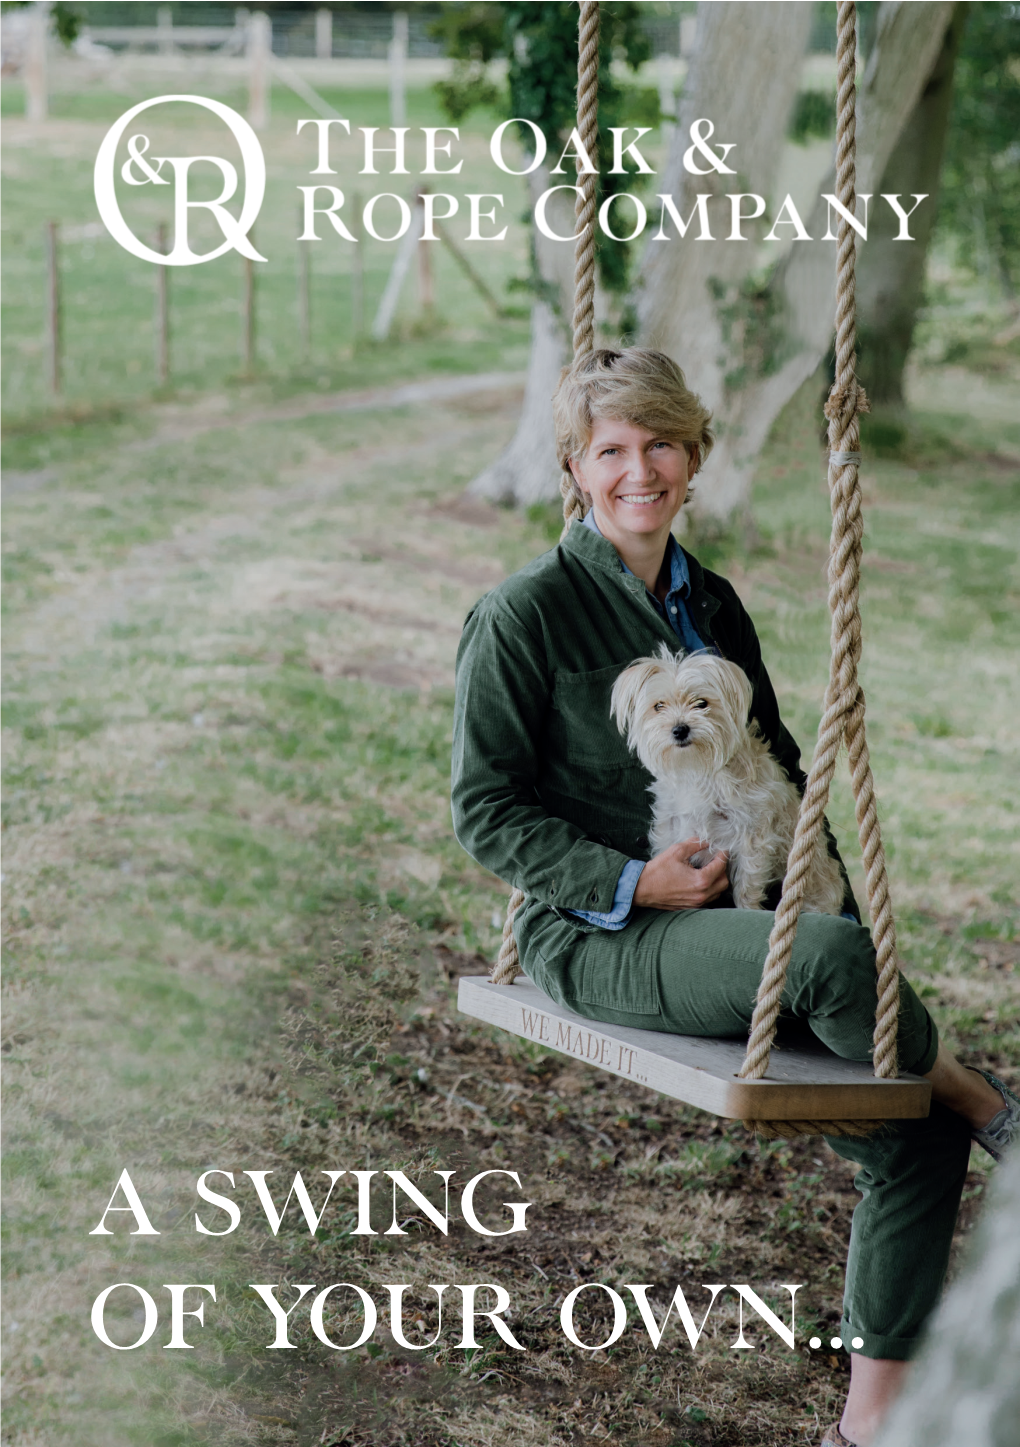 A SWING of YOUR OWN... FIND YOUR HAPPY PLACE Over the Years Lots of People Have Asked Us About the Best Way to Hang an Oak & Rope Swing